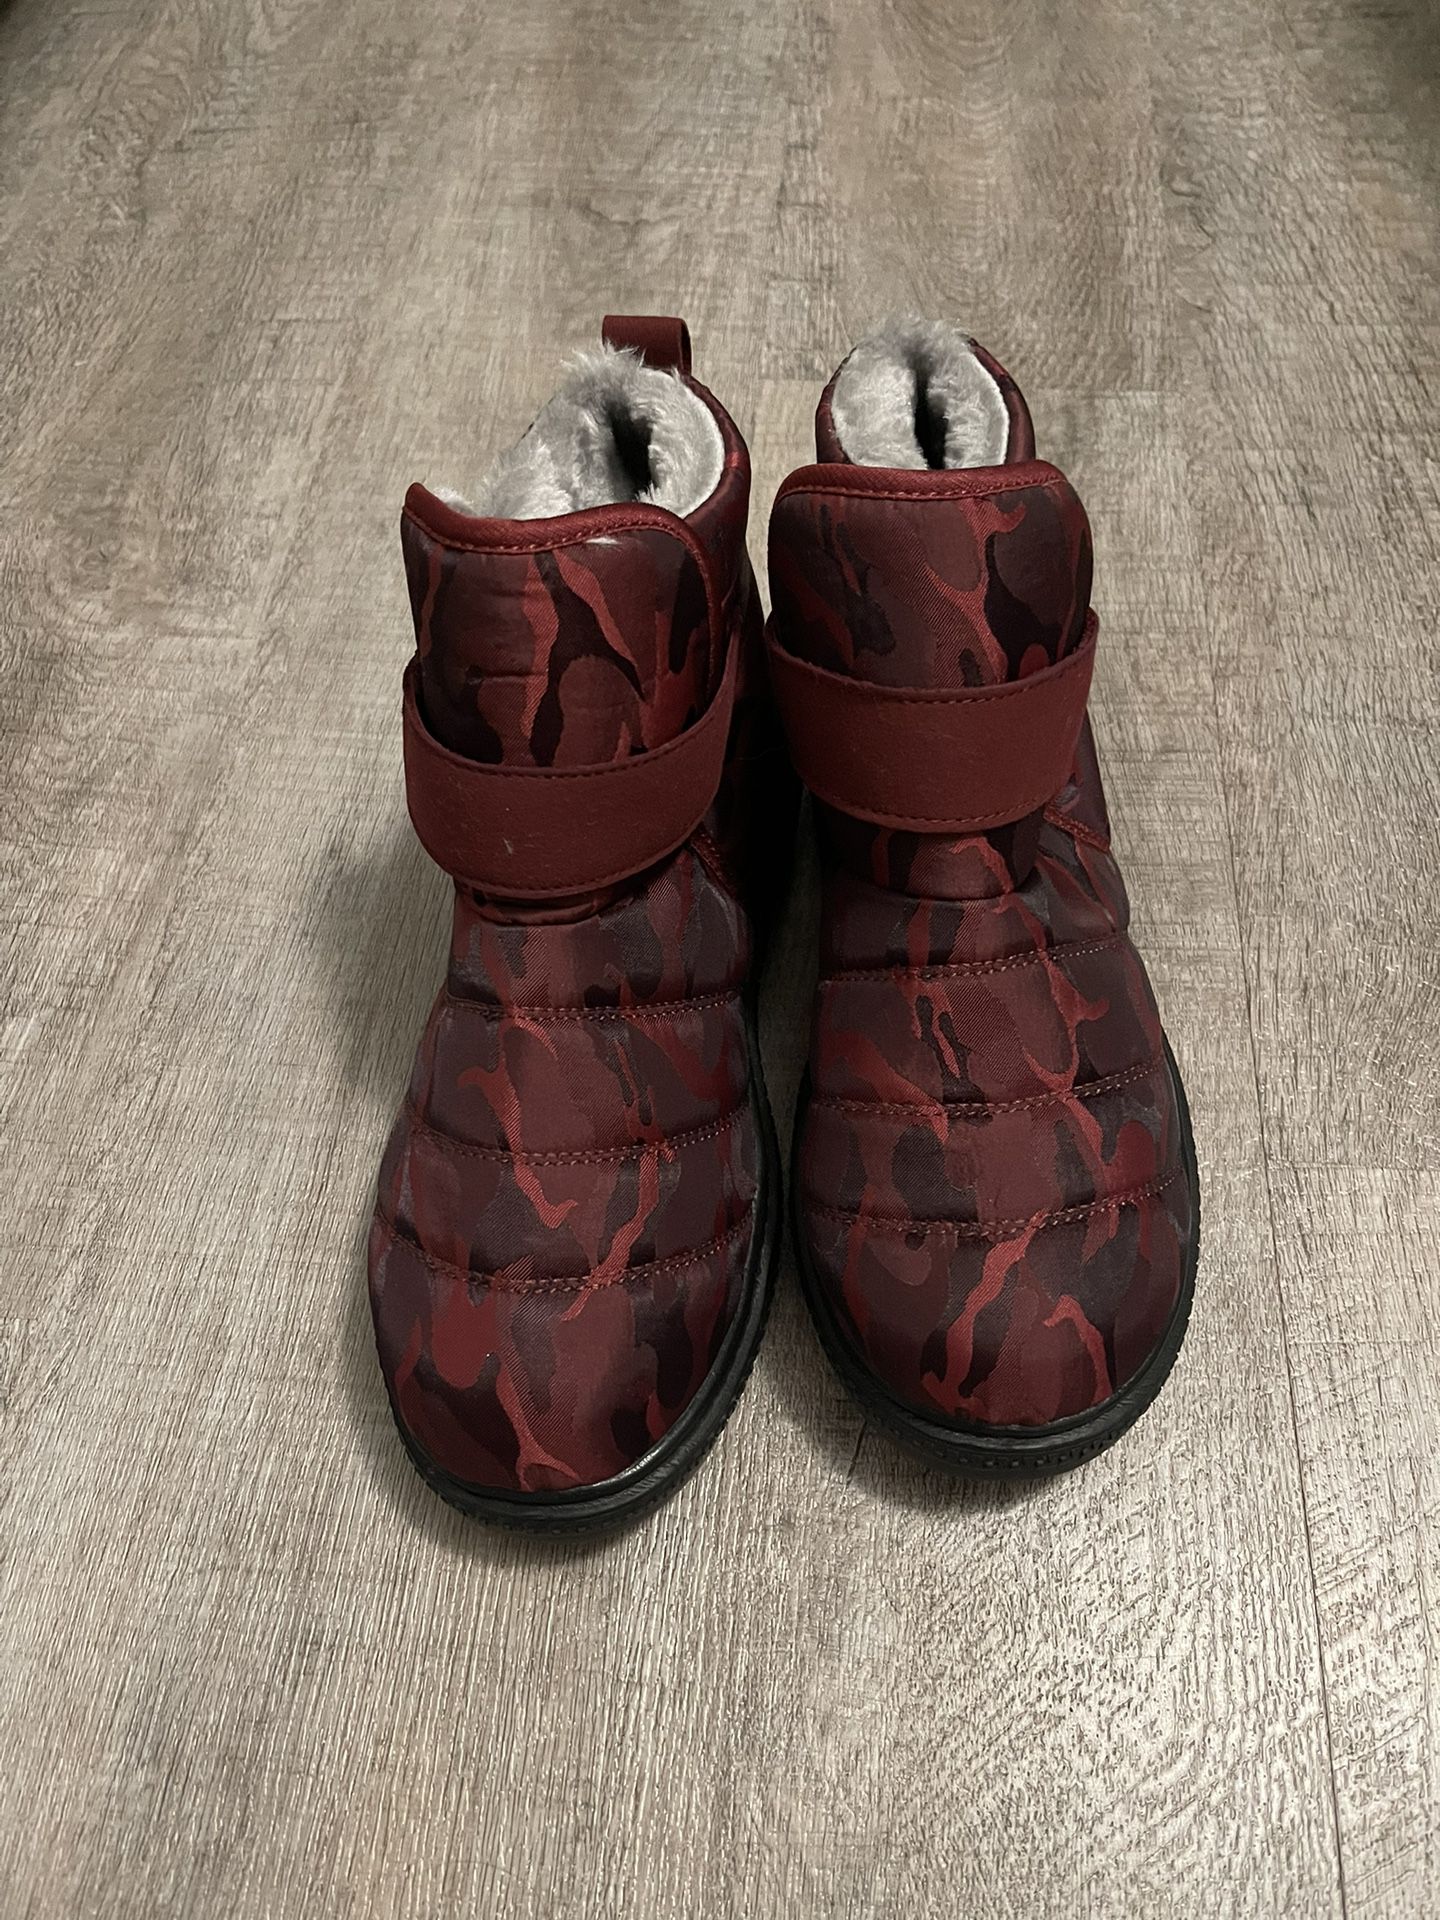 Fur Lined Winter Boots